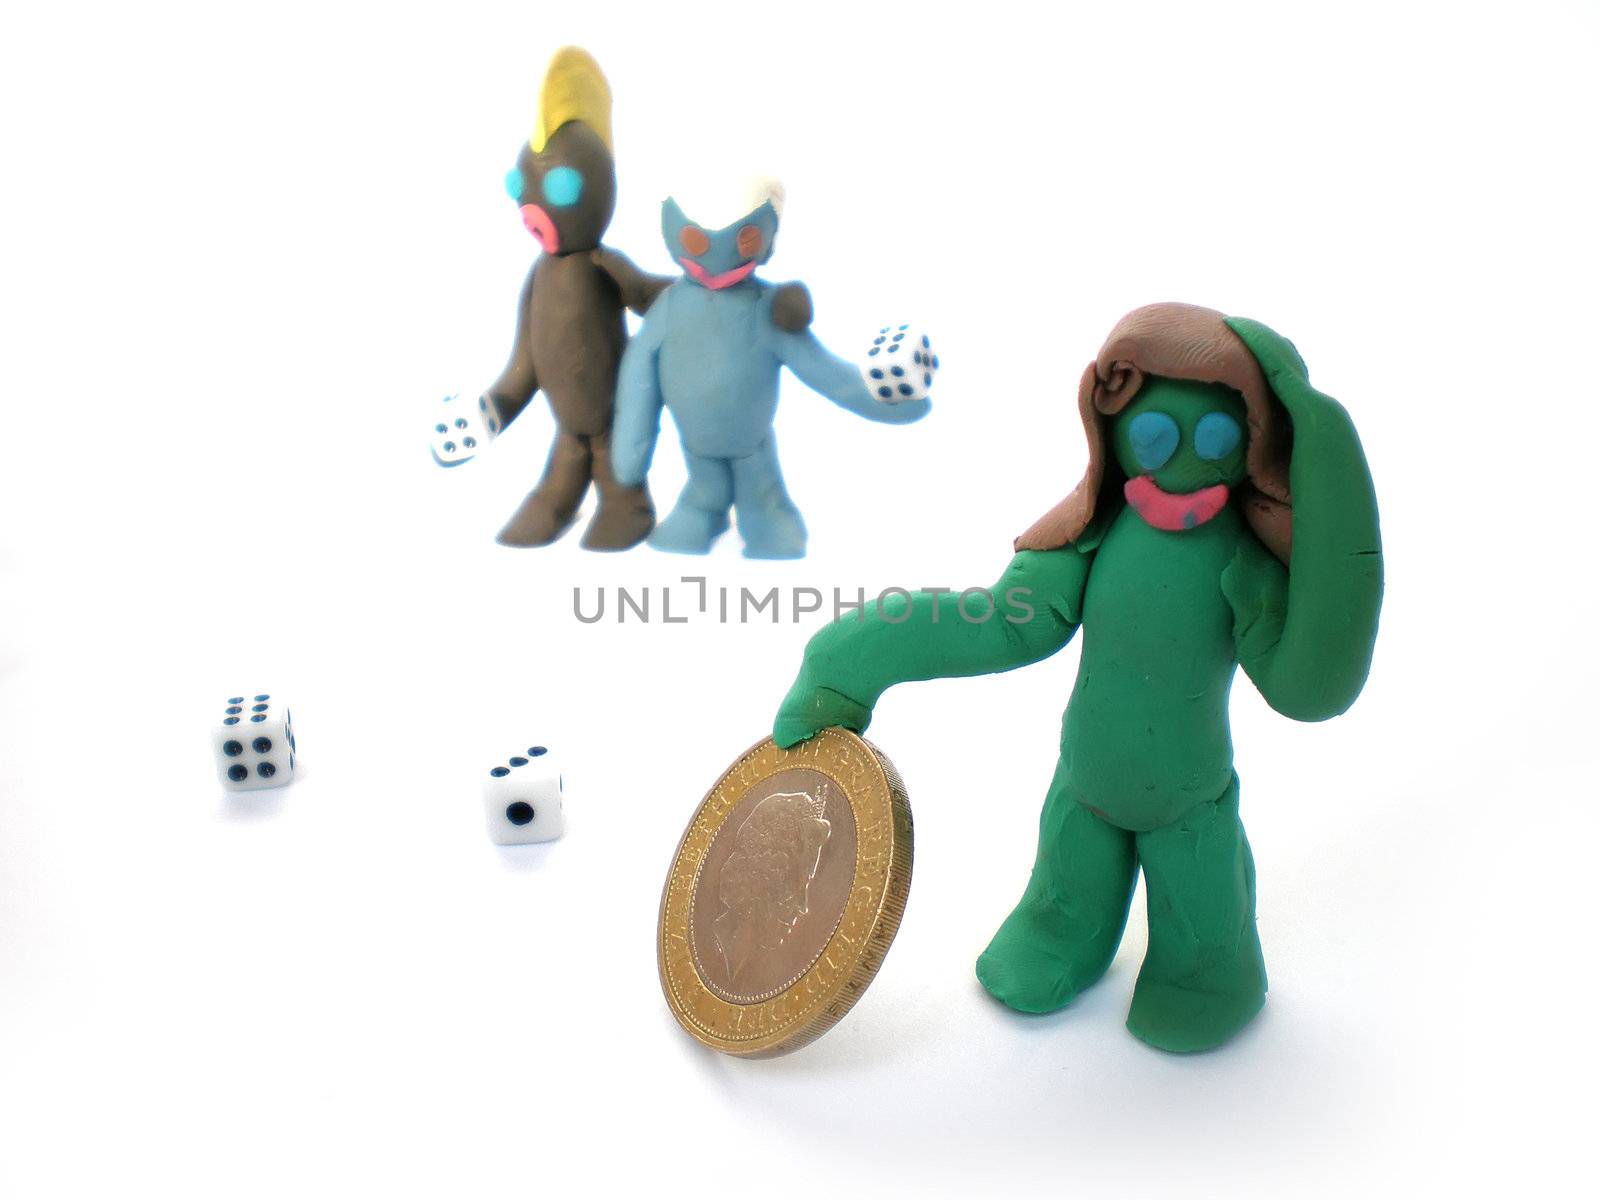 plasticine people figures playing with dice on white background